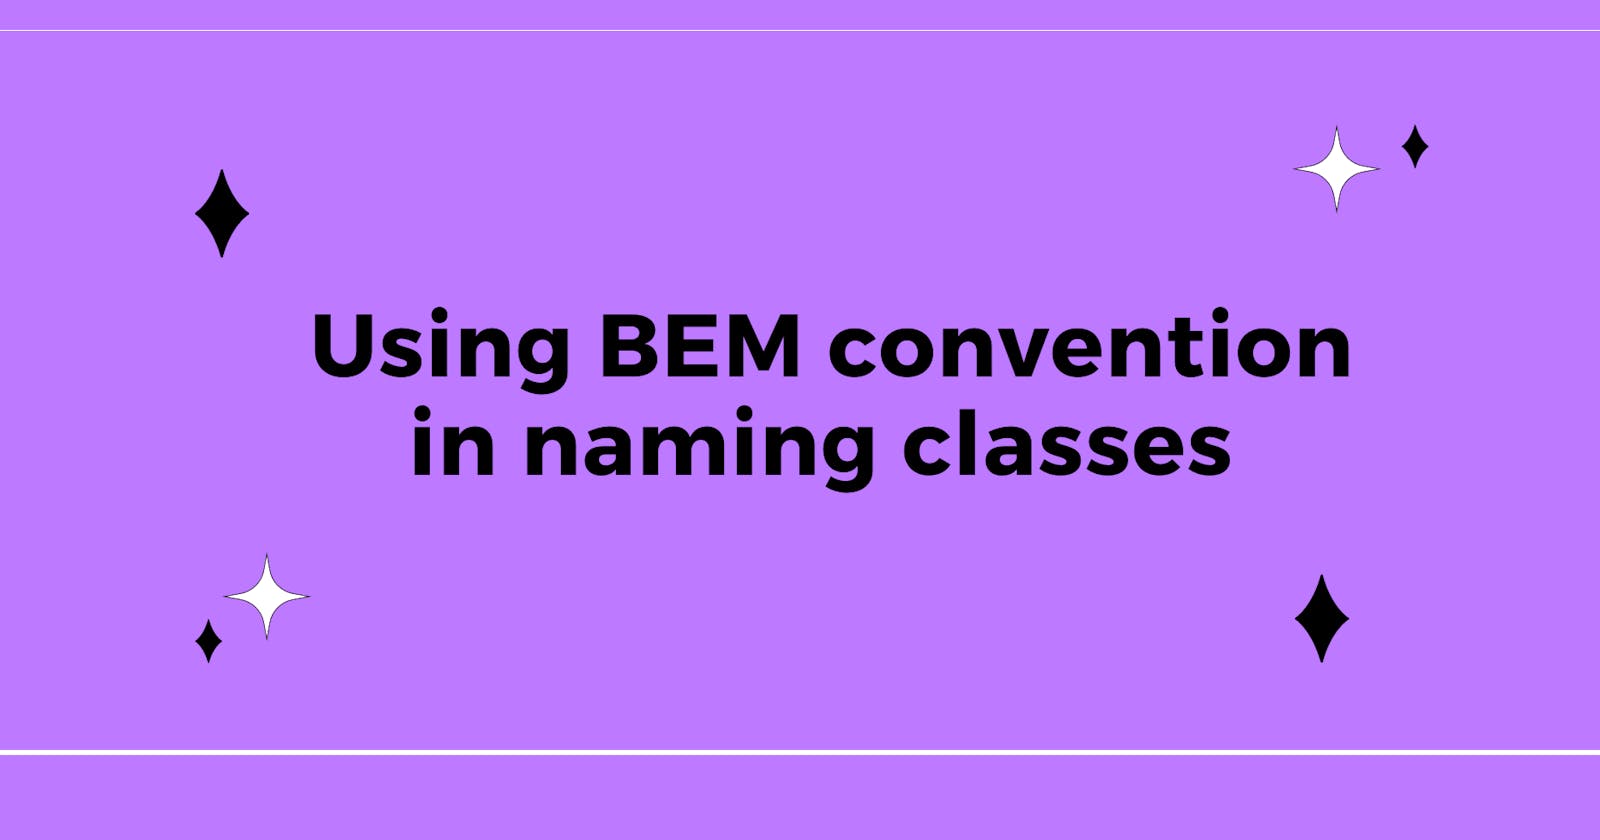 Using BEM convention in naming classes